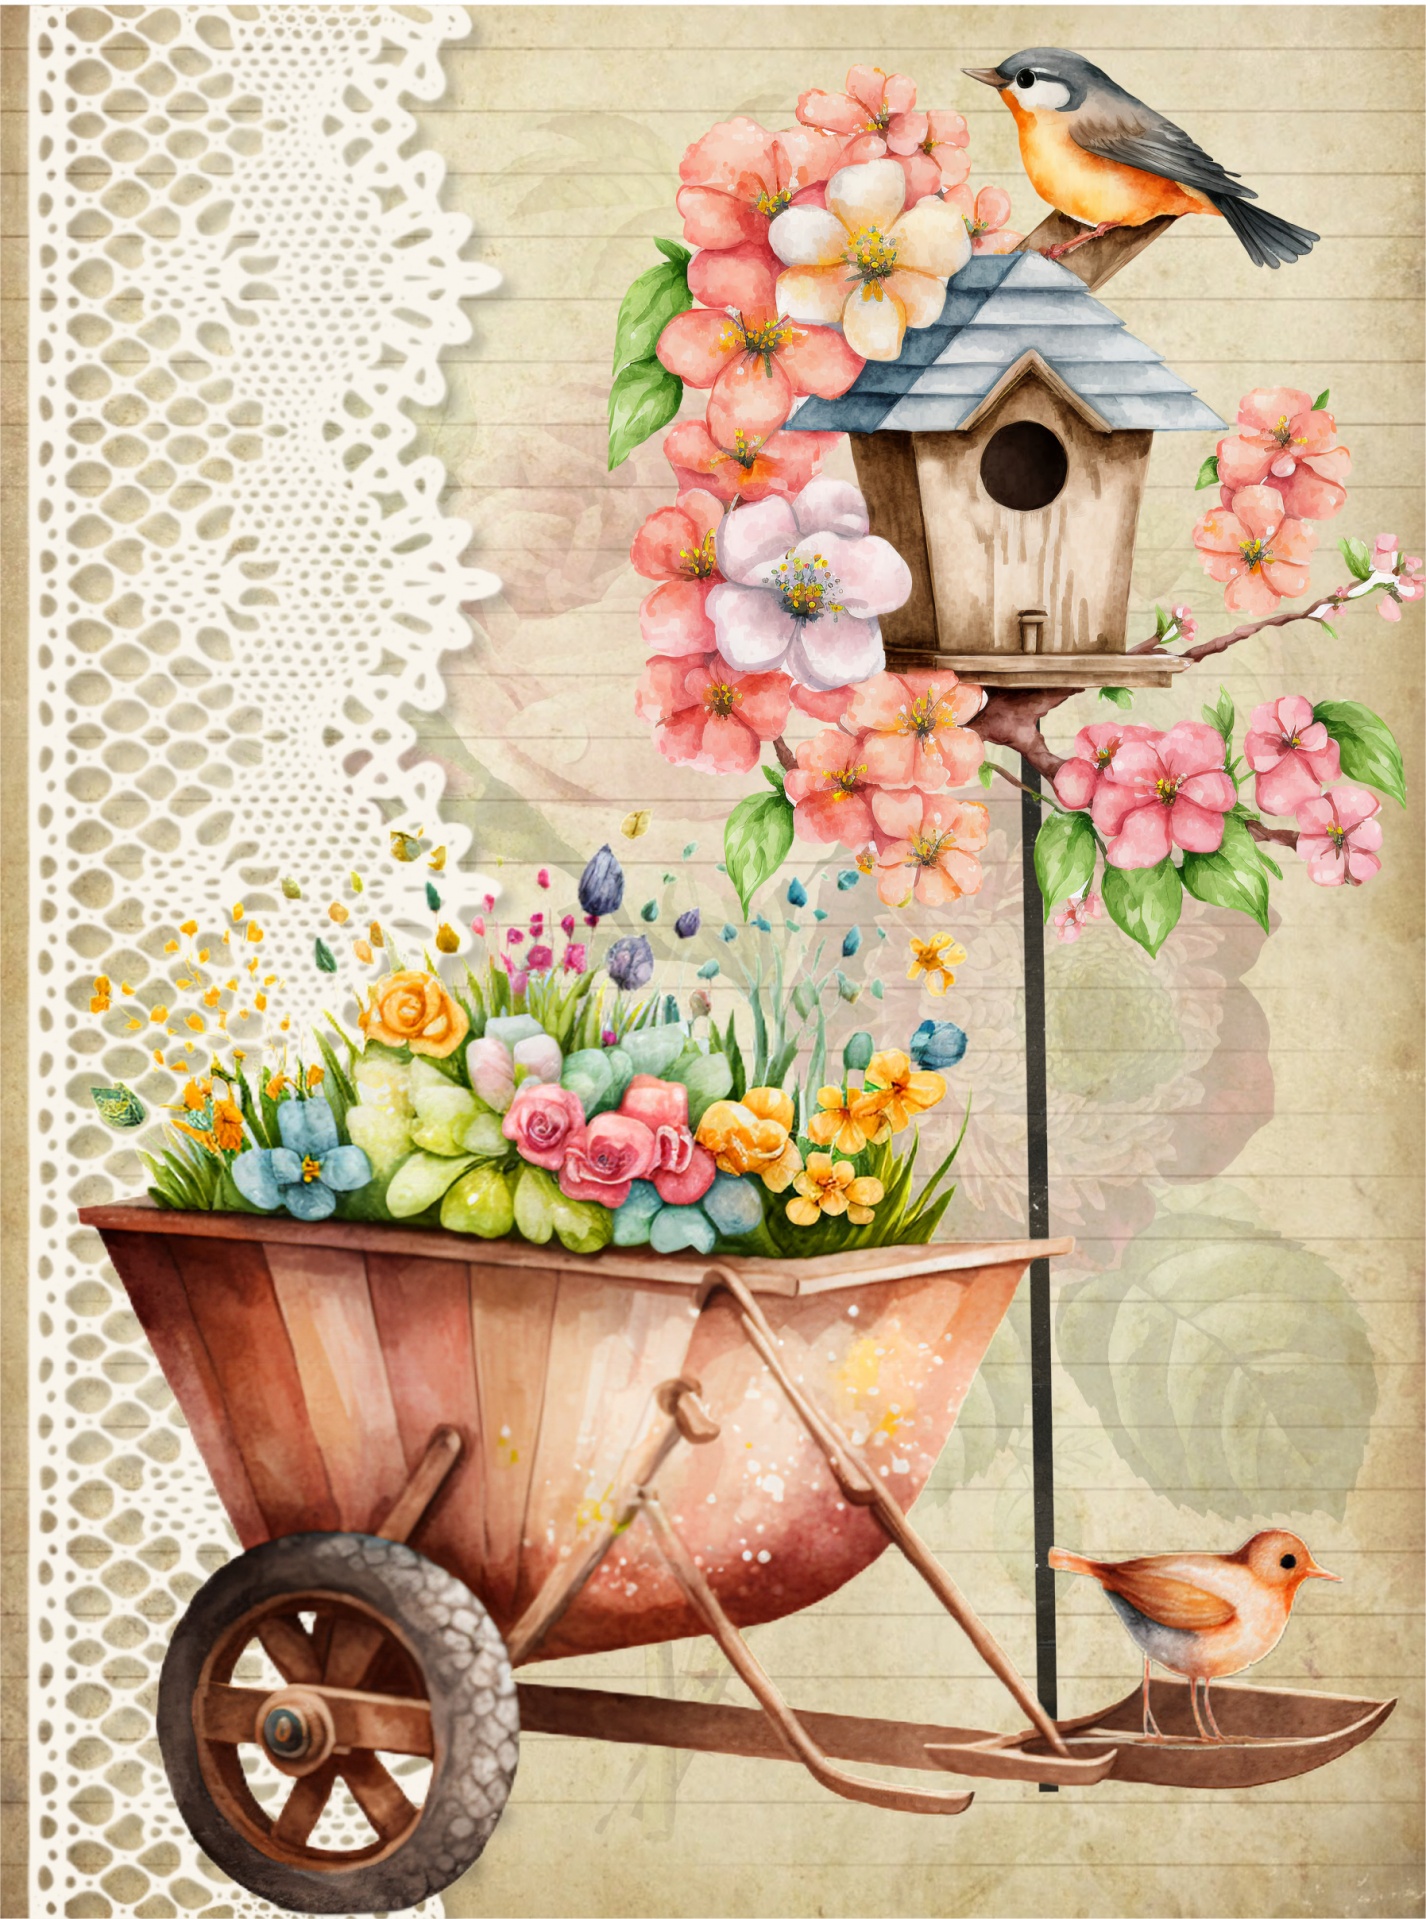 beautiful watercolor illustration of a wheelbarrow full of flowers with a bird sitting on a birdhouse